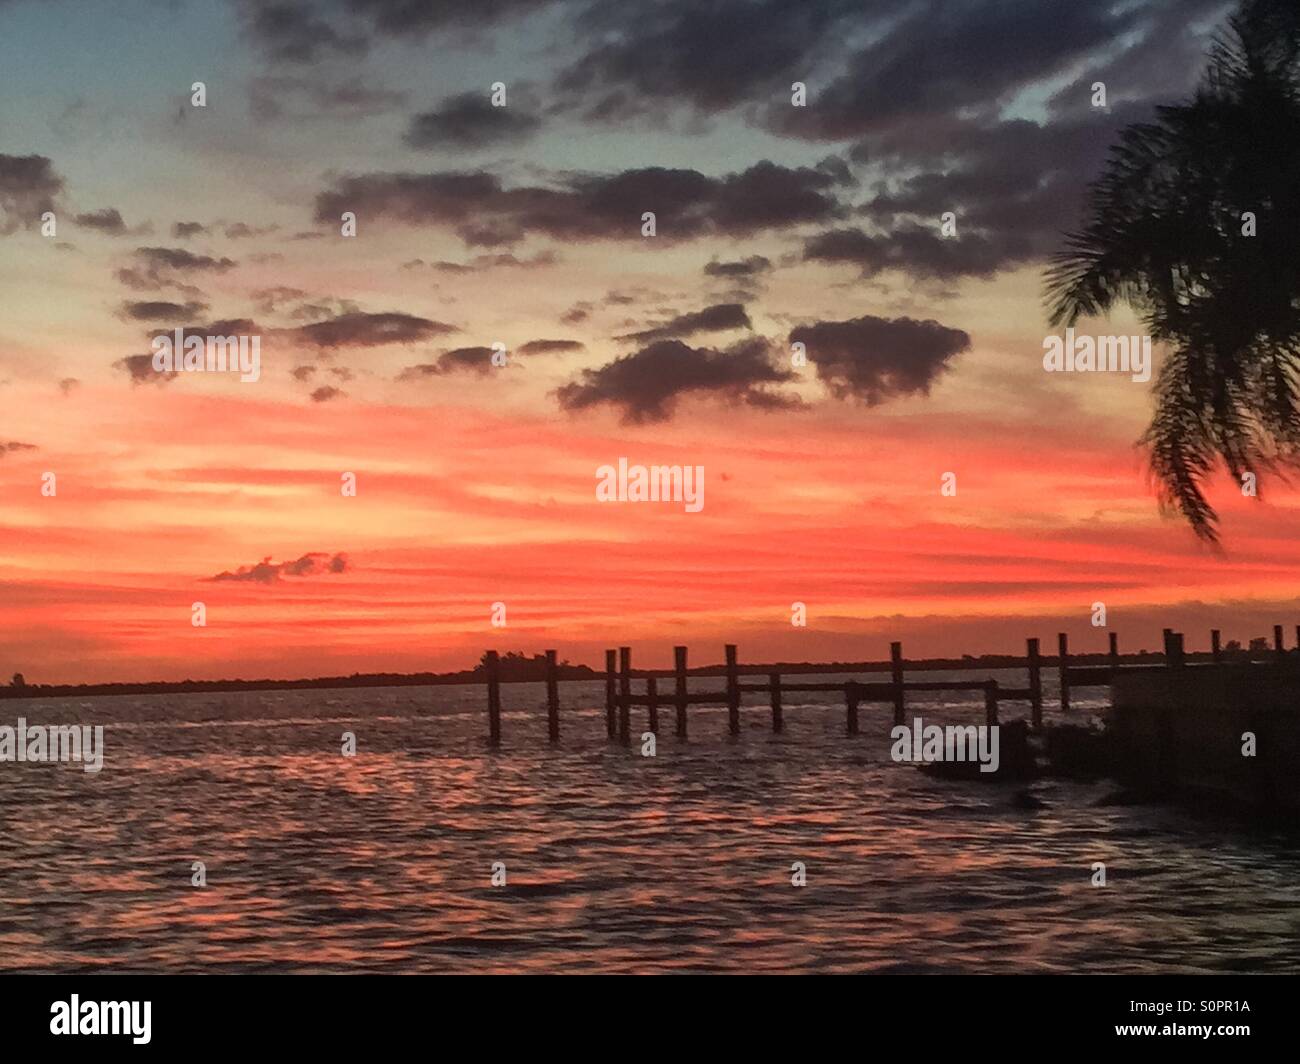 Palm trees, water and sunset in Port Charlotte, Florida. Stock Photo